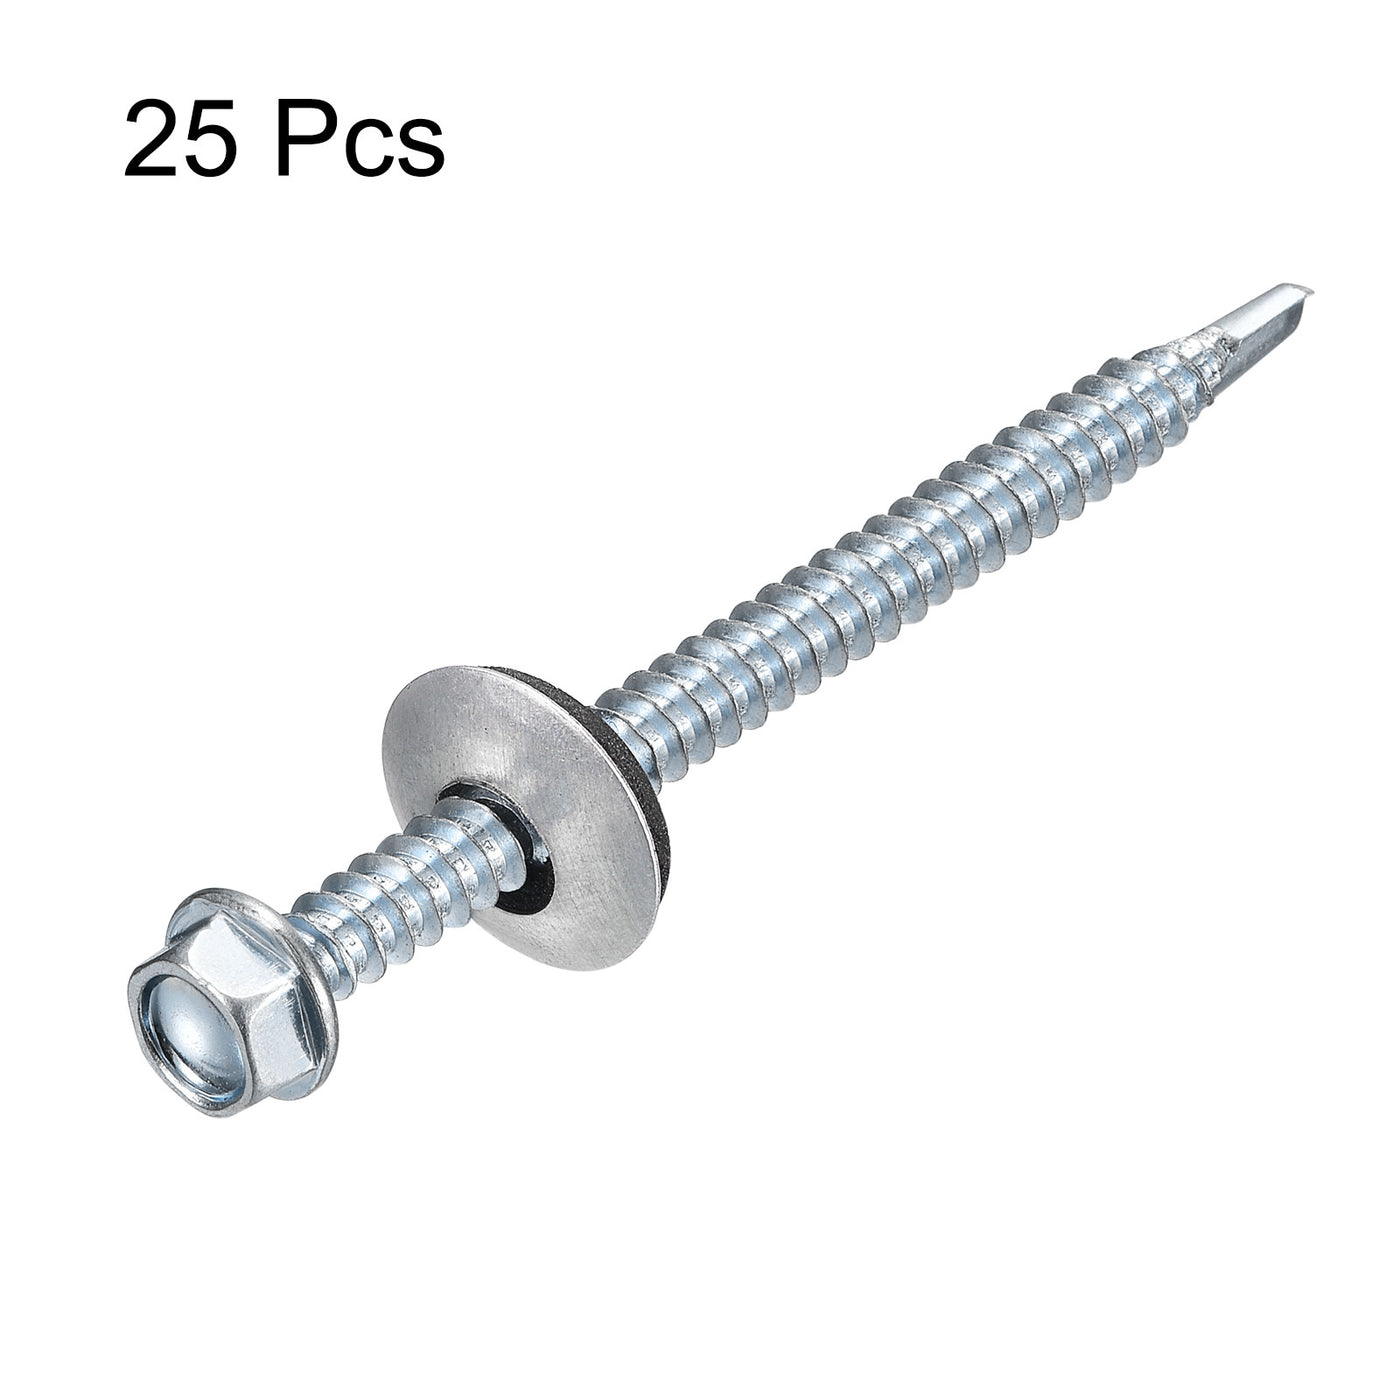 uxcell Uxcell #12 x 2-61/64" Self Drilling Screws, 25pcs Roofing Screws with EPDM Washer